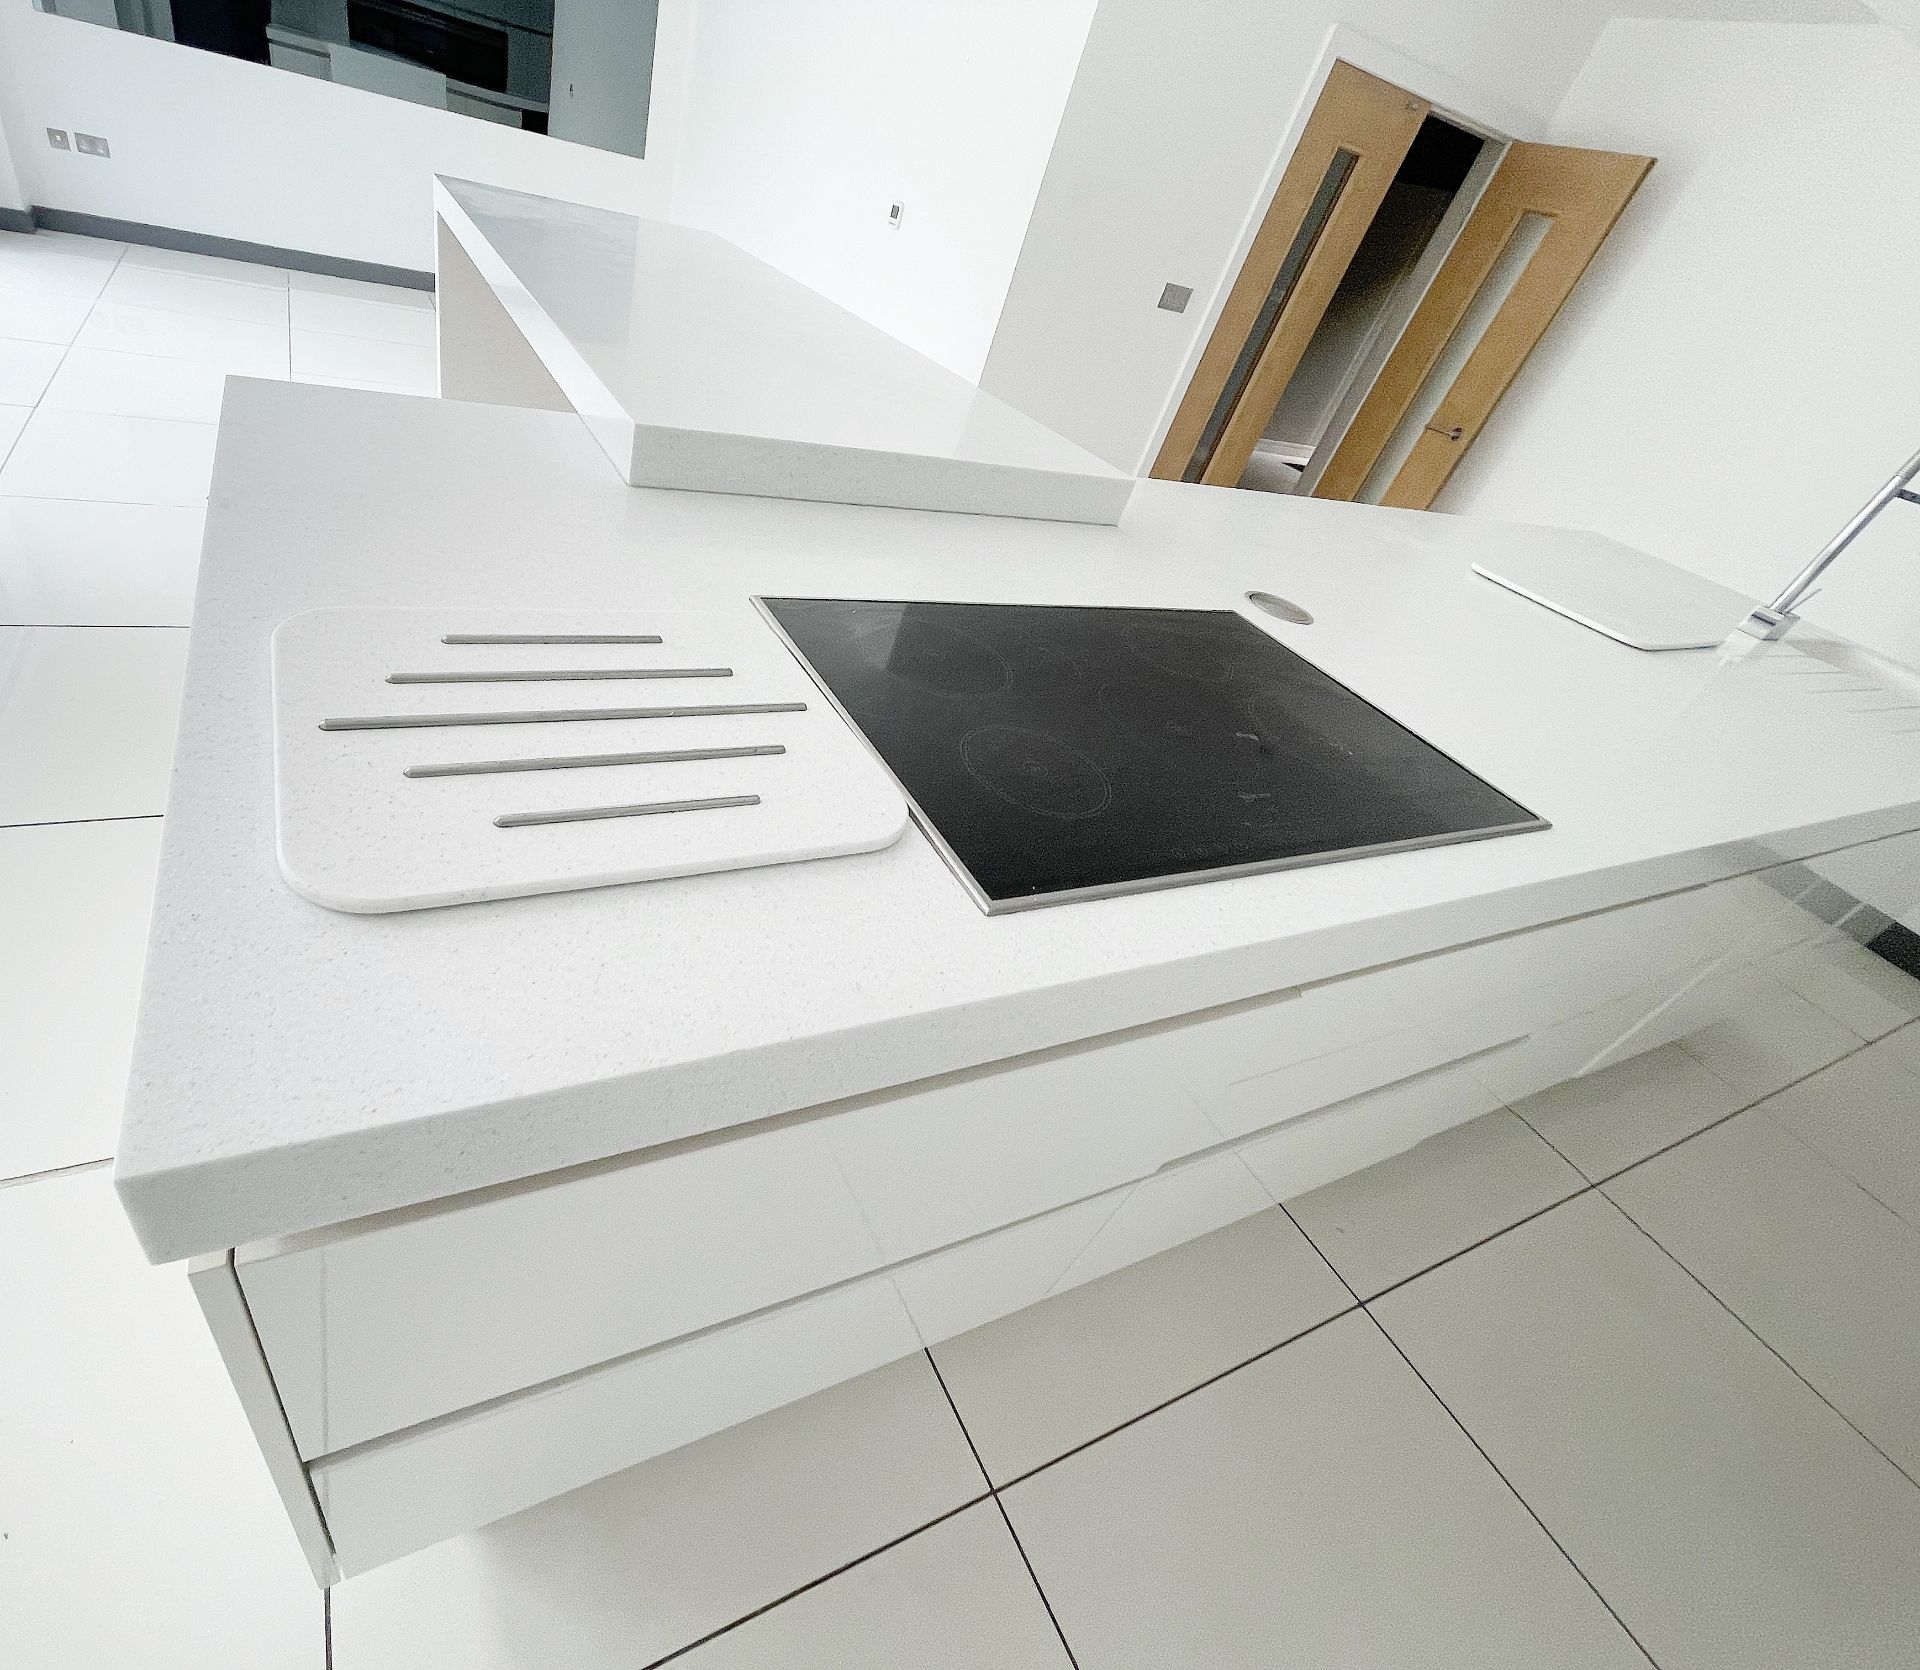 1 x SieMatic Contemporary Fitted Kitchen With Branded Appliances, Central Island + Corian Worktops - Image 20 of 100